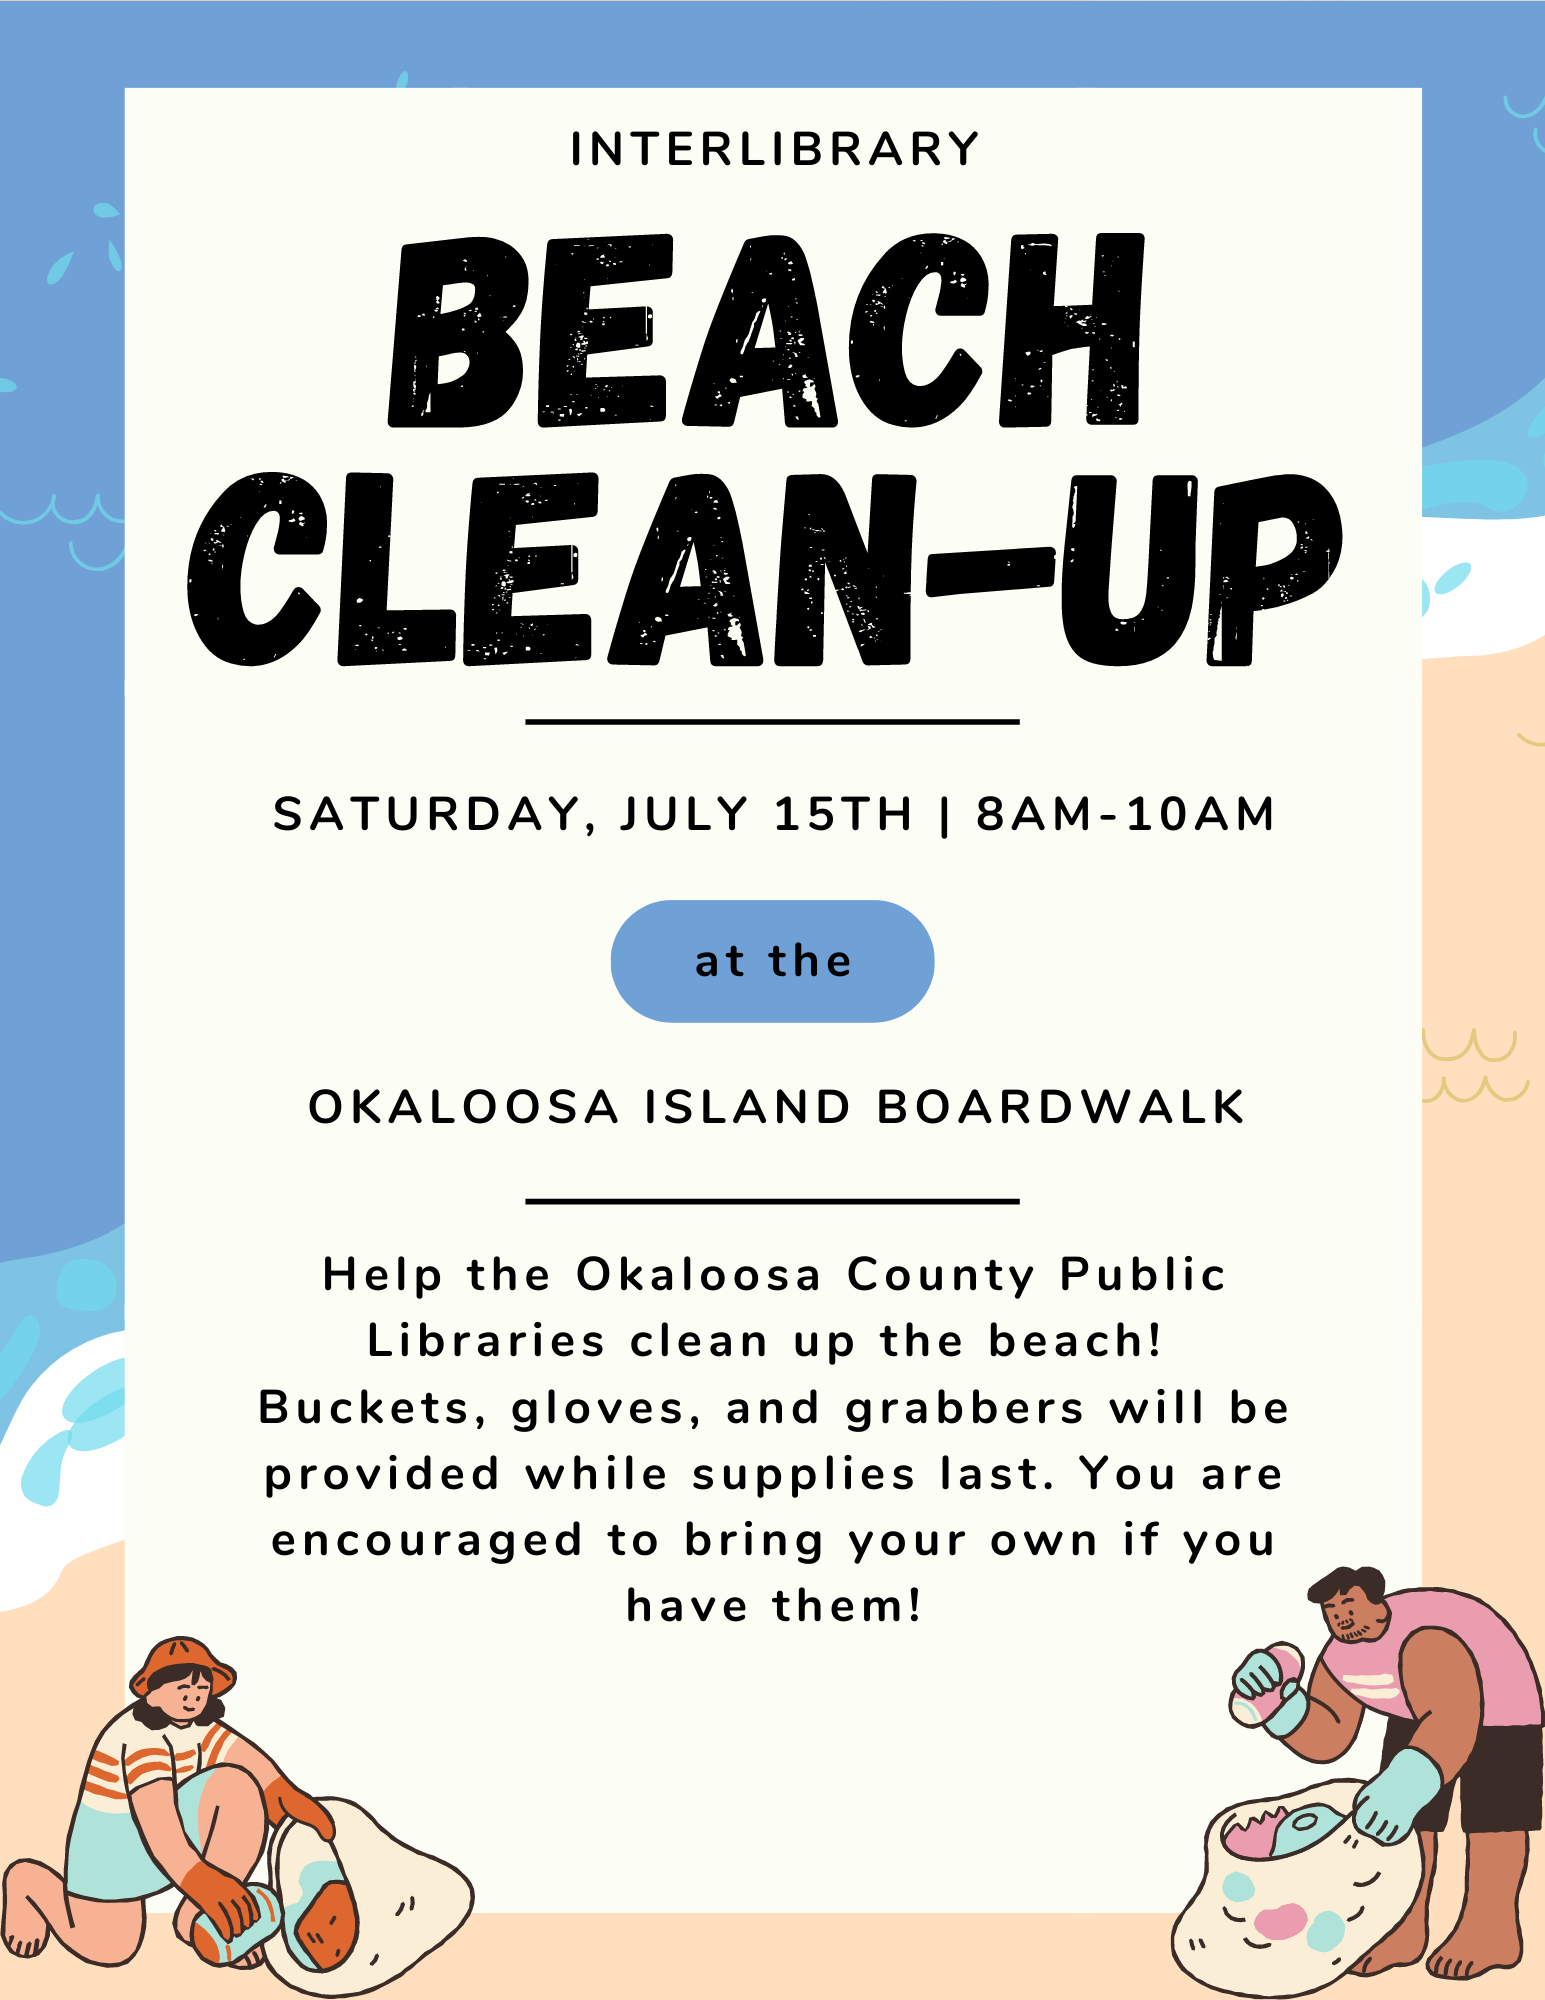 Image is a flyer with a beach background and two cartoon characters in the corners picking up trash. The text contains all the information found in the event.